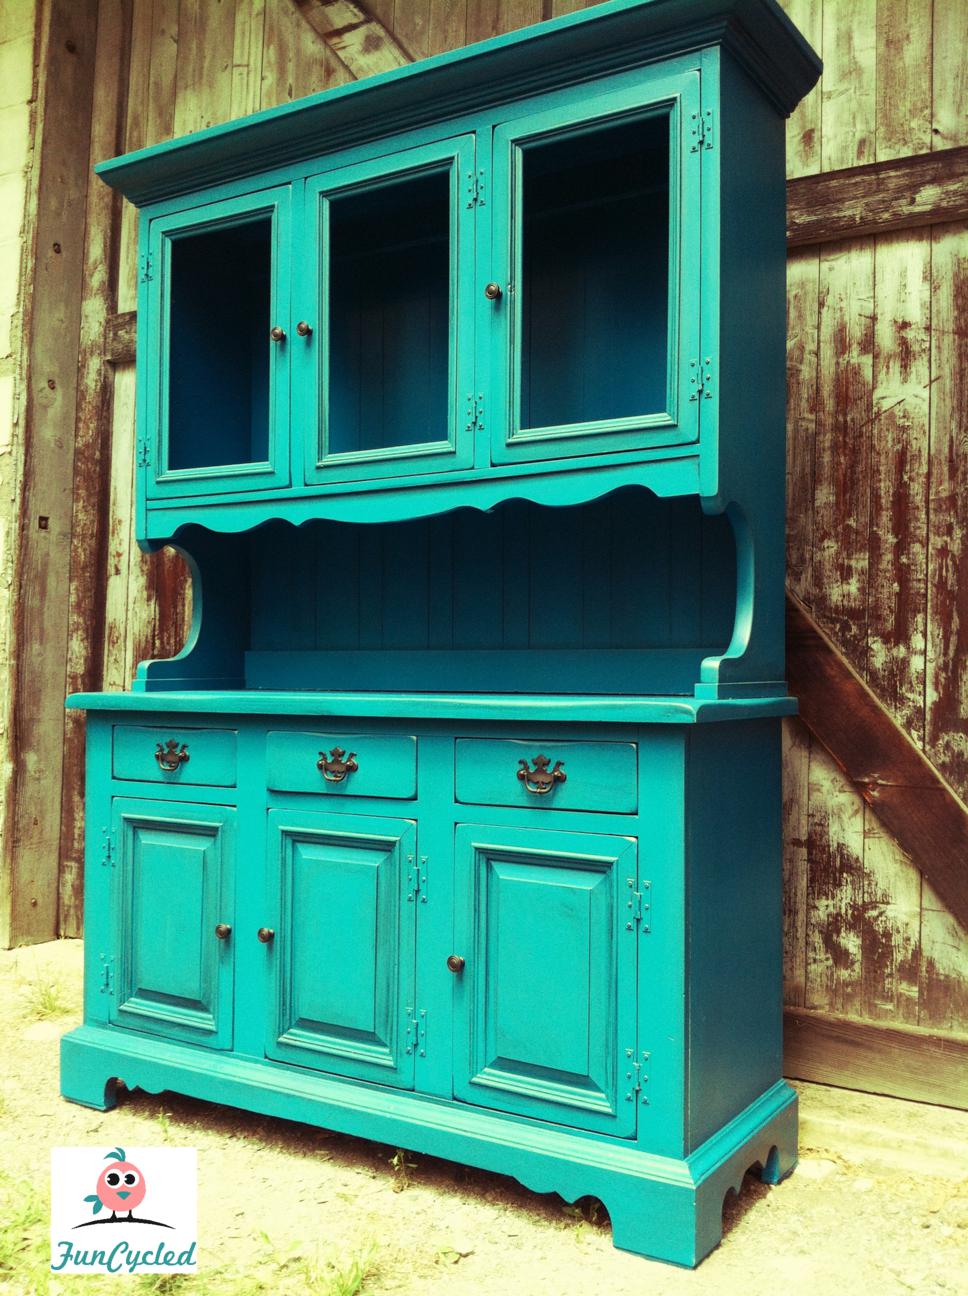 Tuesday S Treasures Vintage Teal Hutch And Red French Provincial